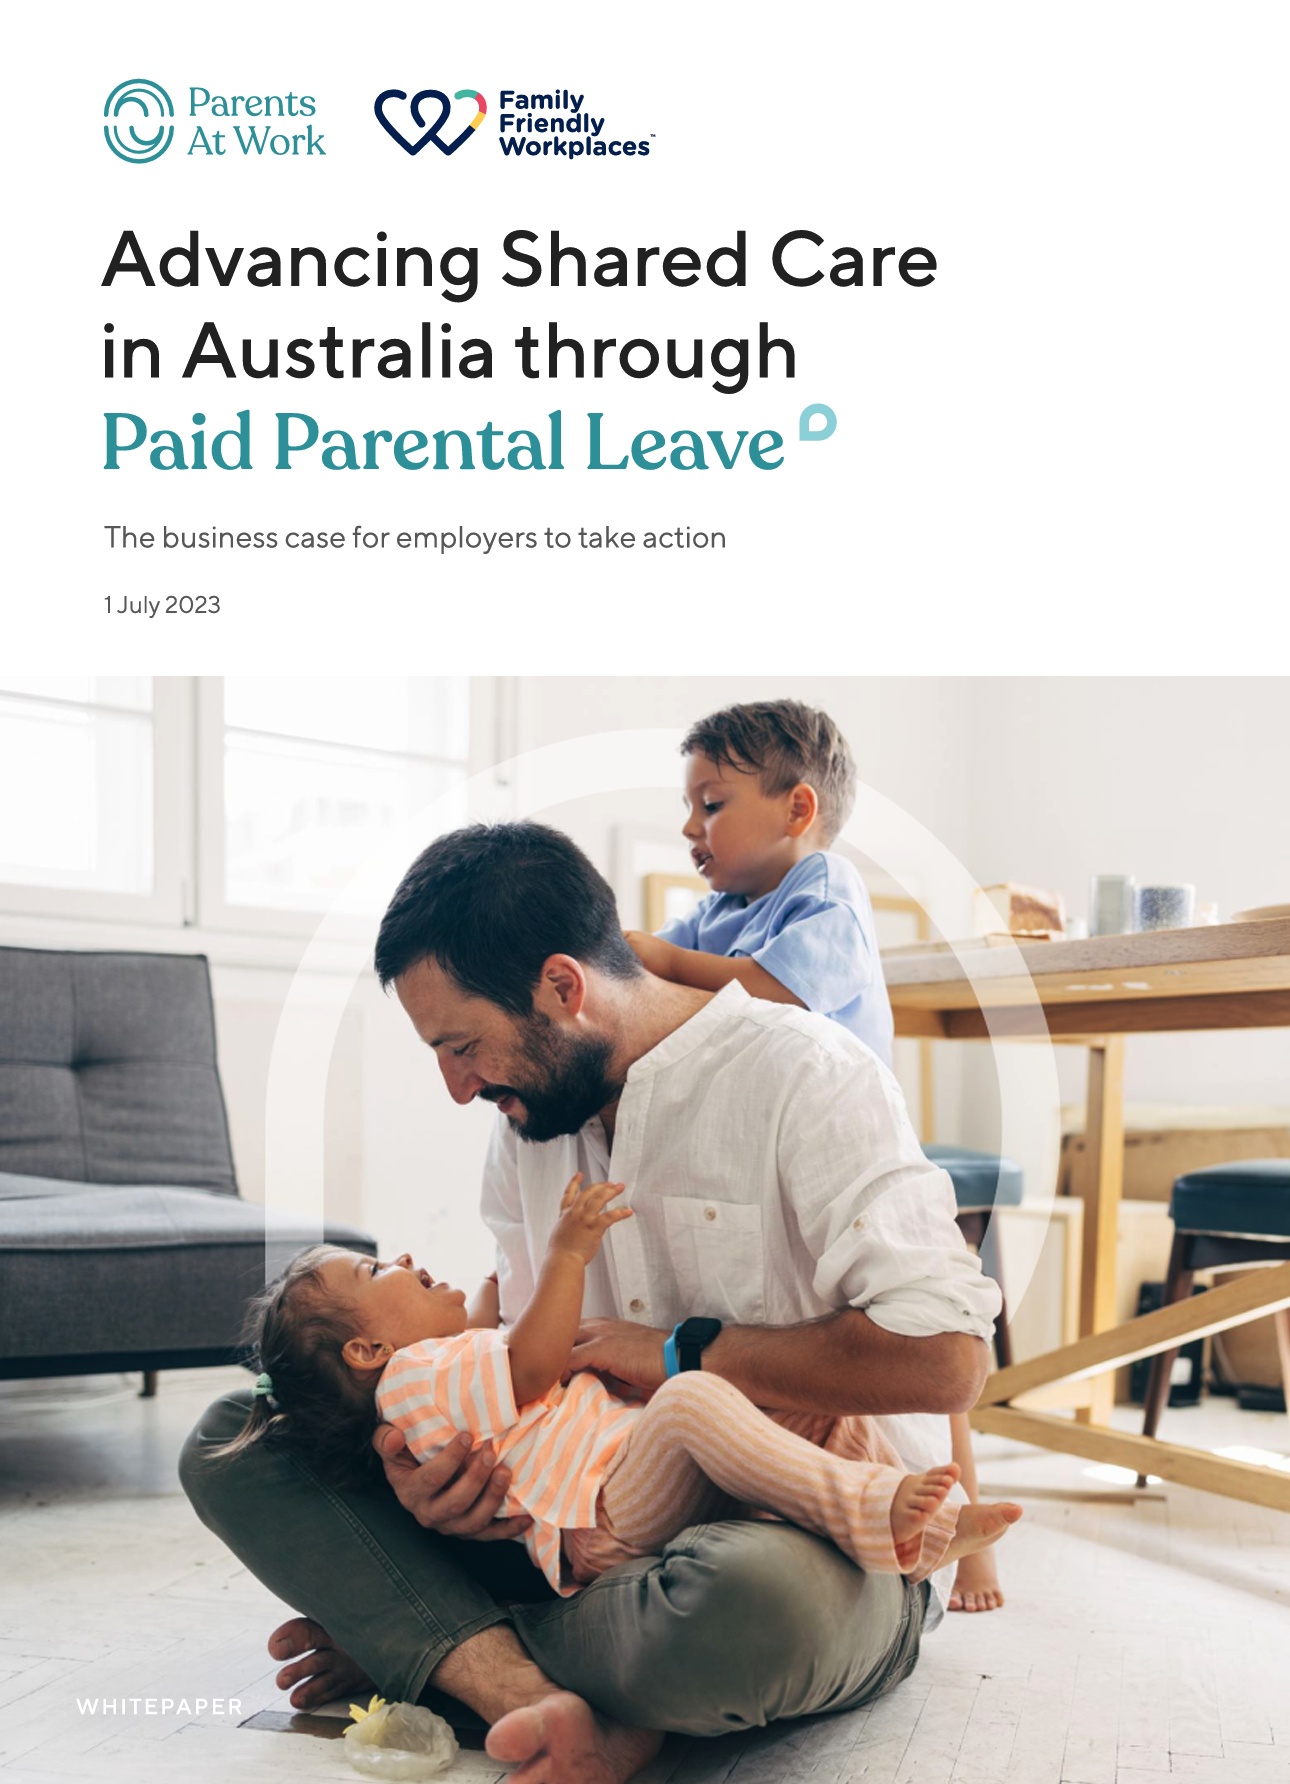 Advancing Shared Care in Australia through Paid Parental Leave